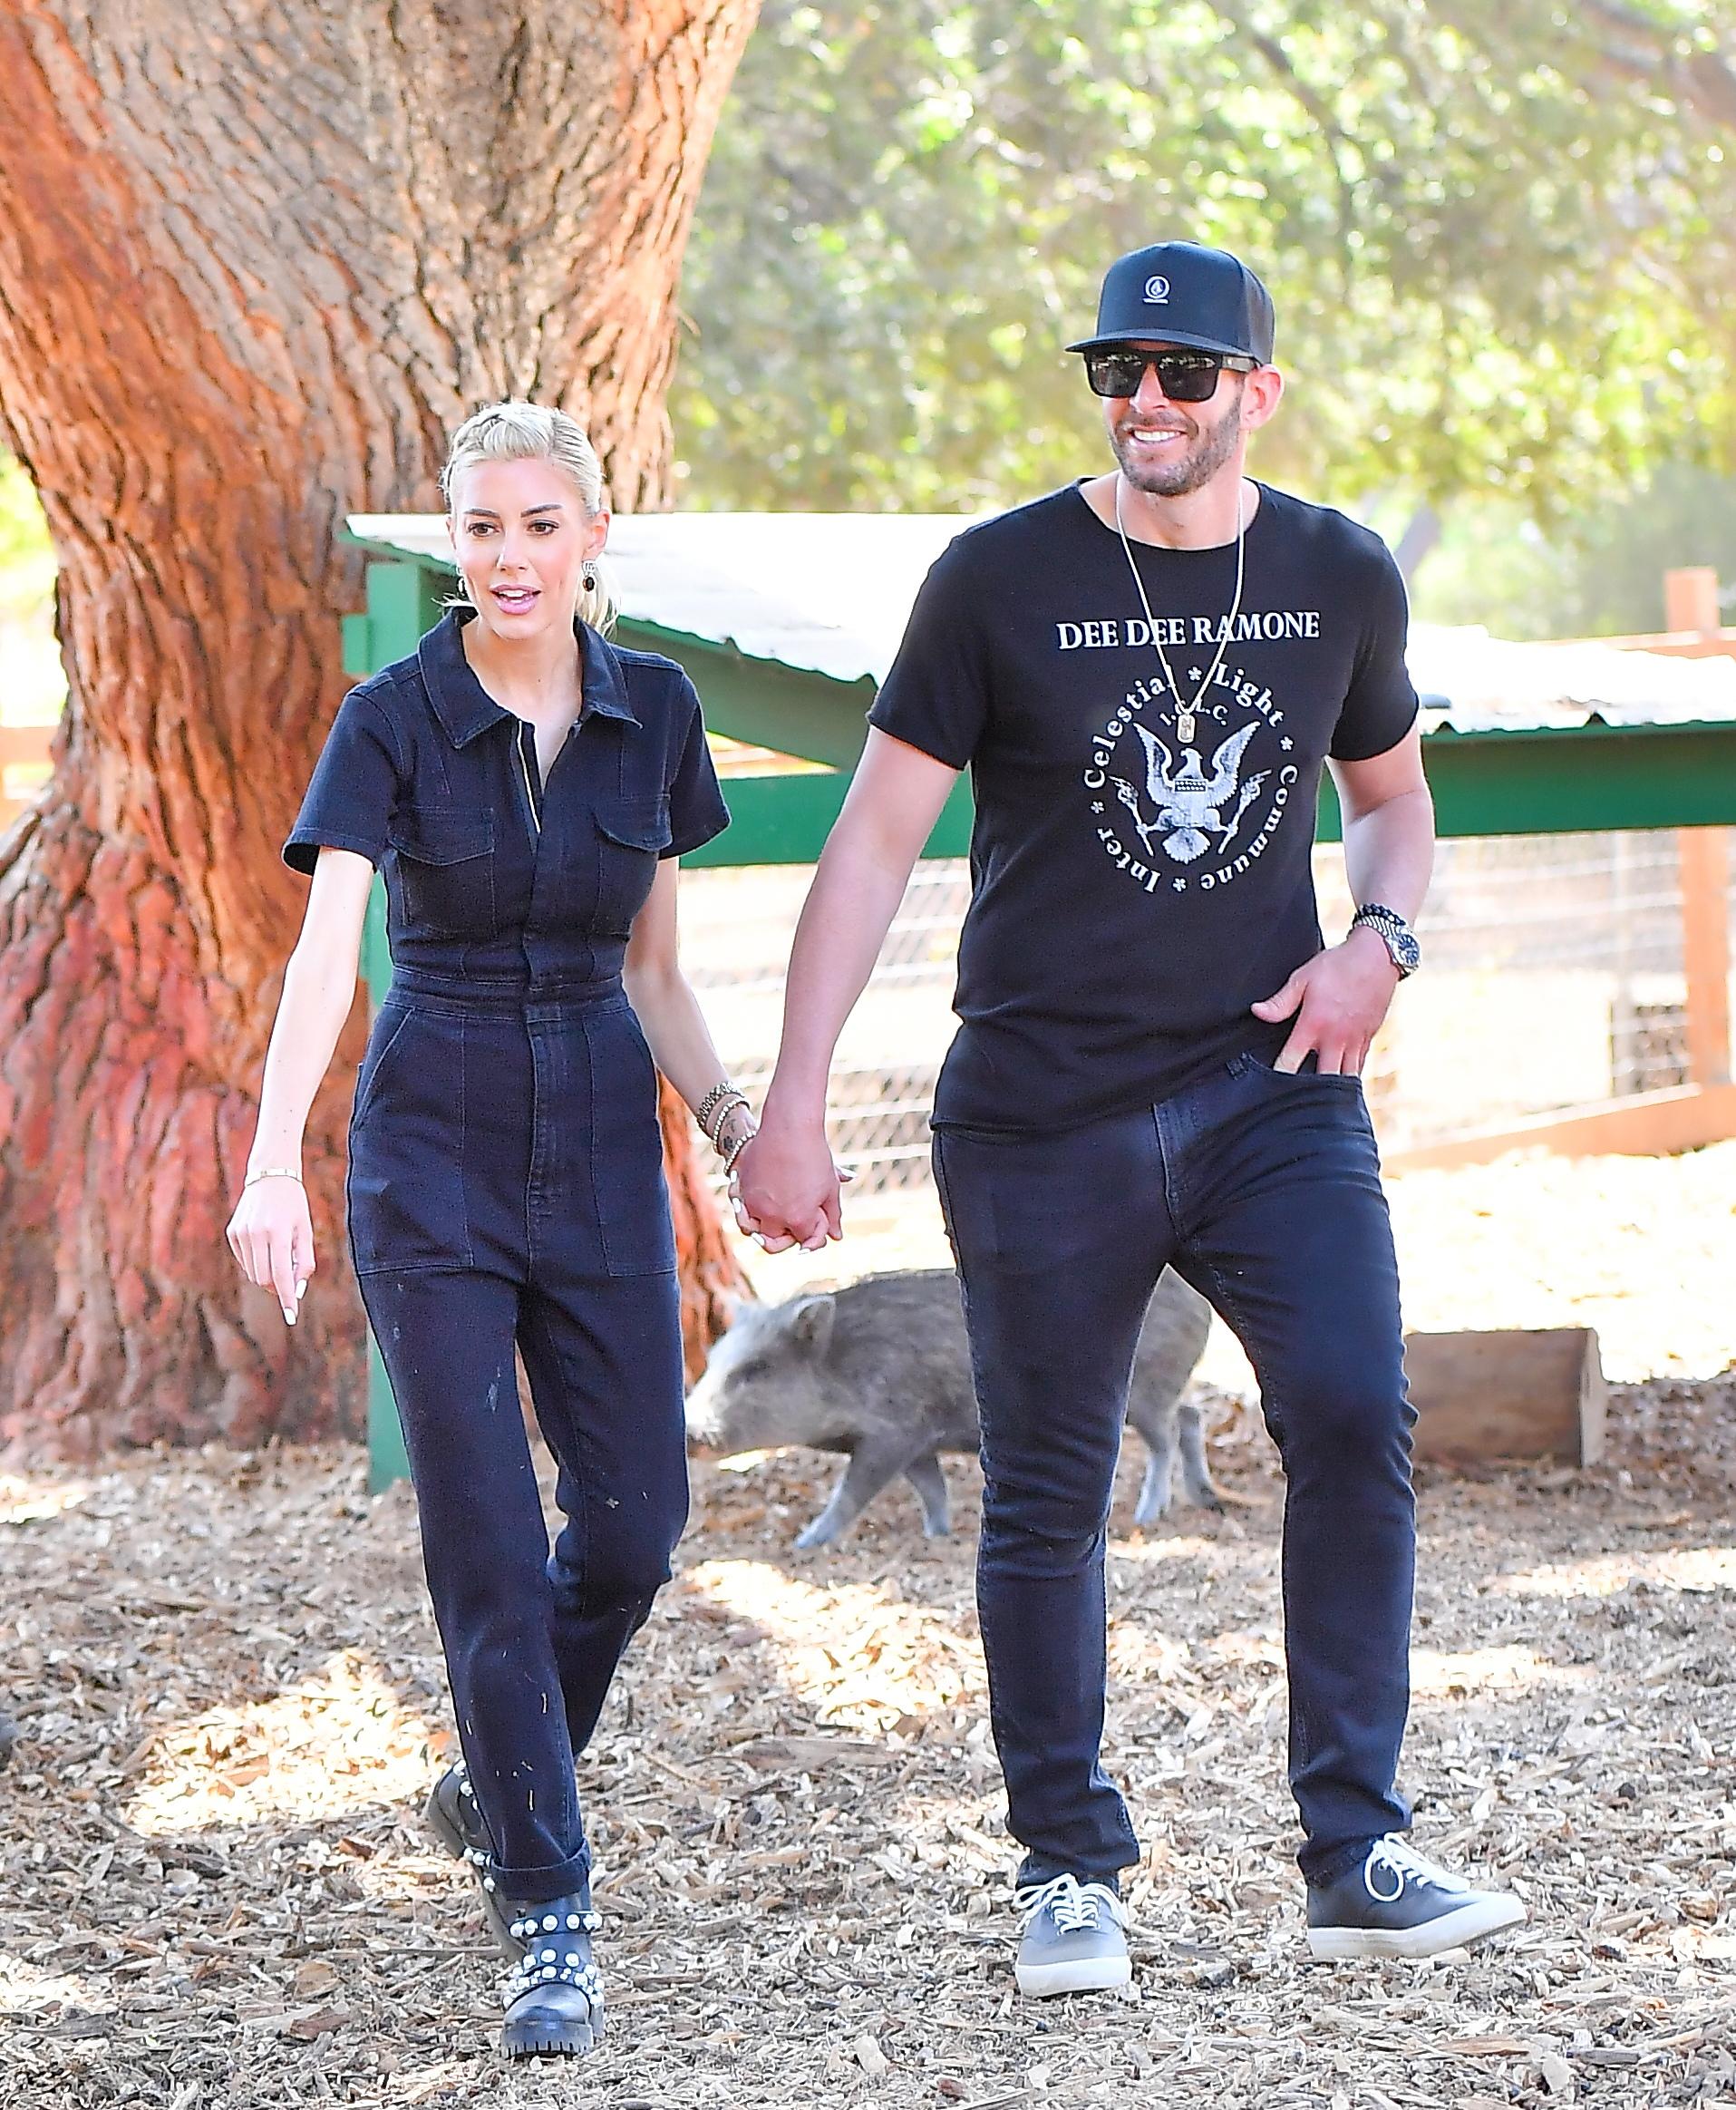 Heather Rae Young and her Fiancé stroll through the Kindred Spirits Care Farm after celebrating her new Peta Campaign